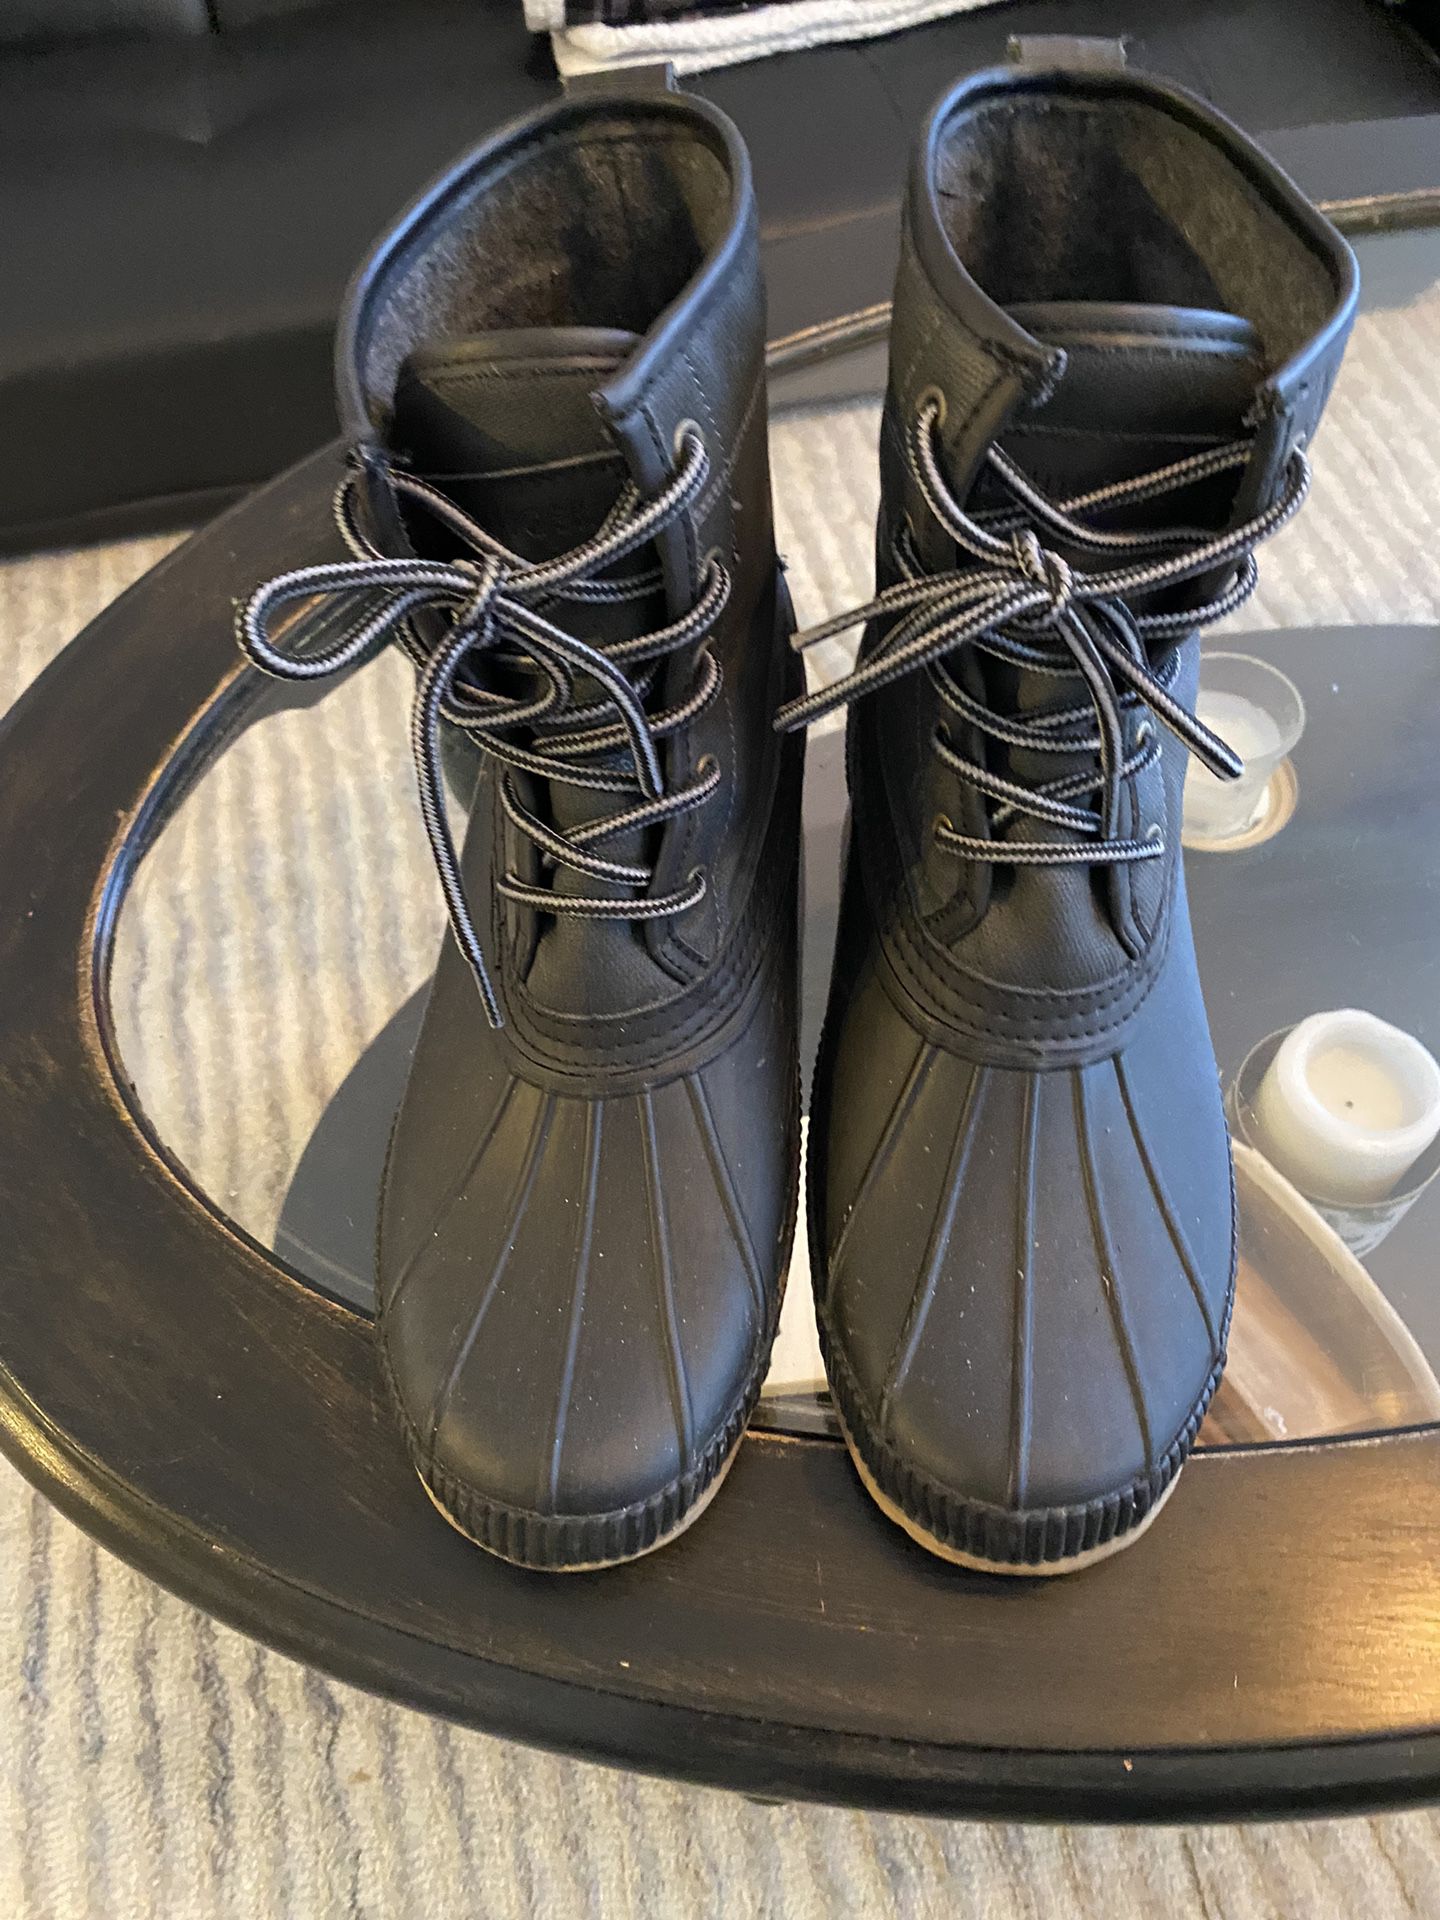 hilfiger boots waterproof size 12 for Sale in IL - OfferUp